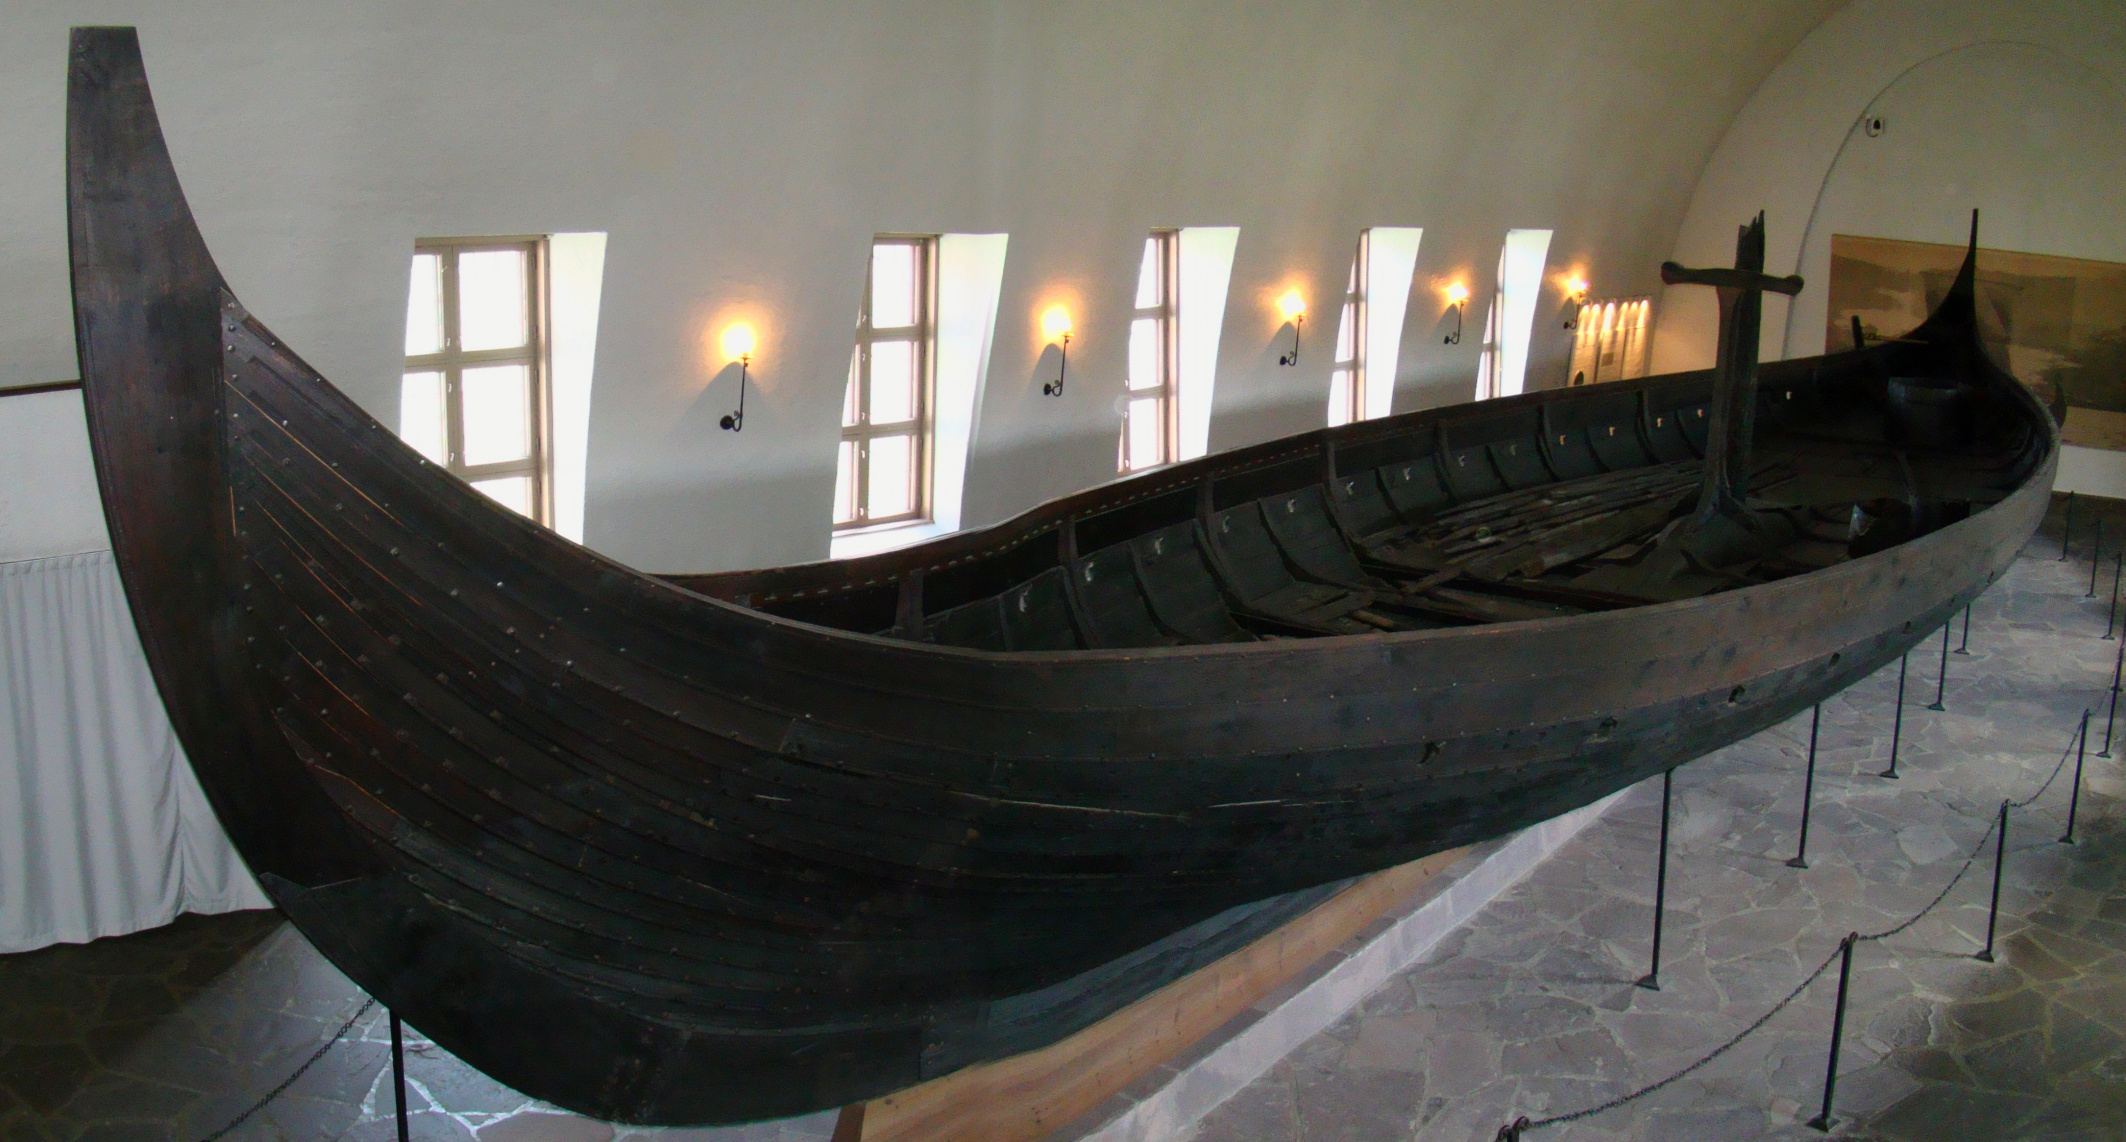 The Gokstad Ship in the purpose-built Viking Ship Museum in Oslo, Norway. The ship is 24 meters long and 5 metres wide, and has room for 32 men with oars to row.